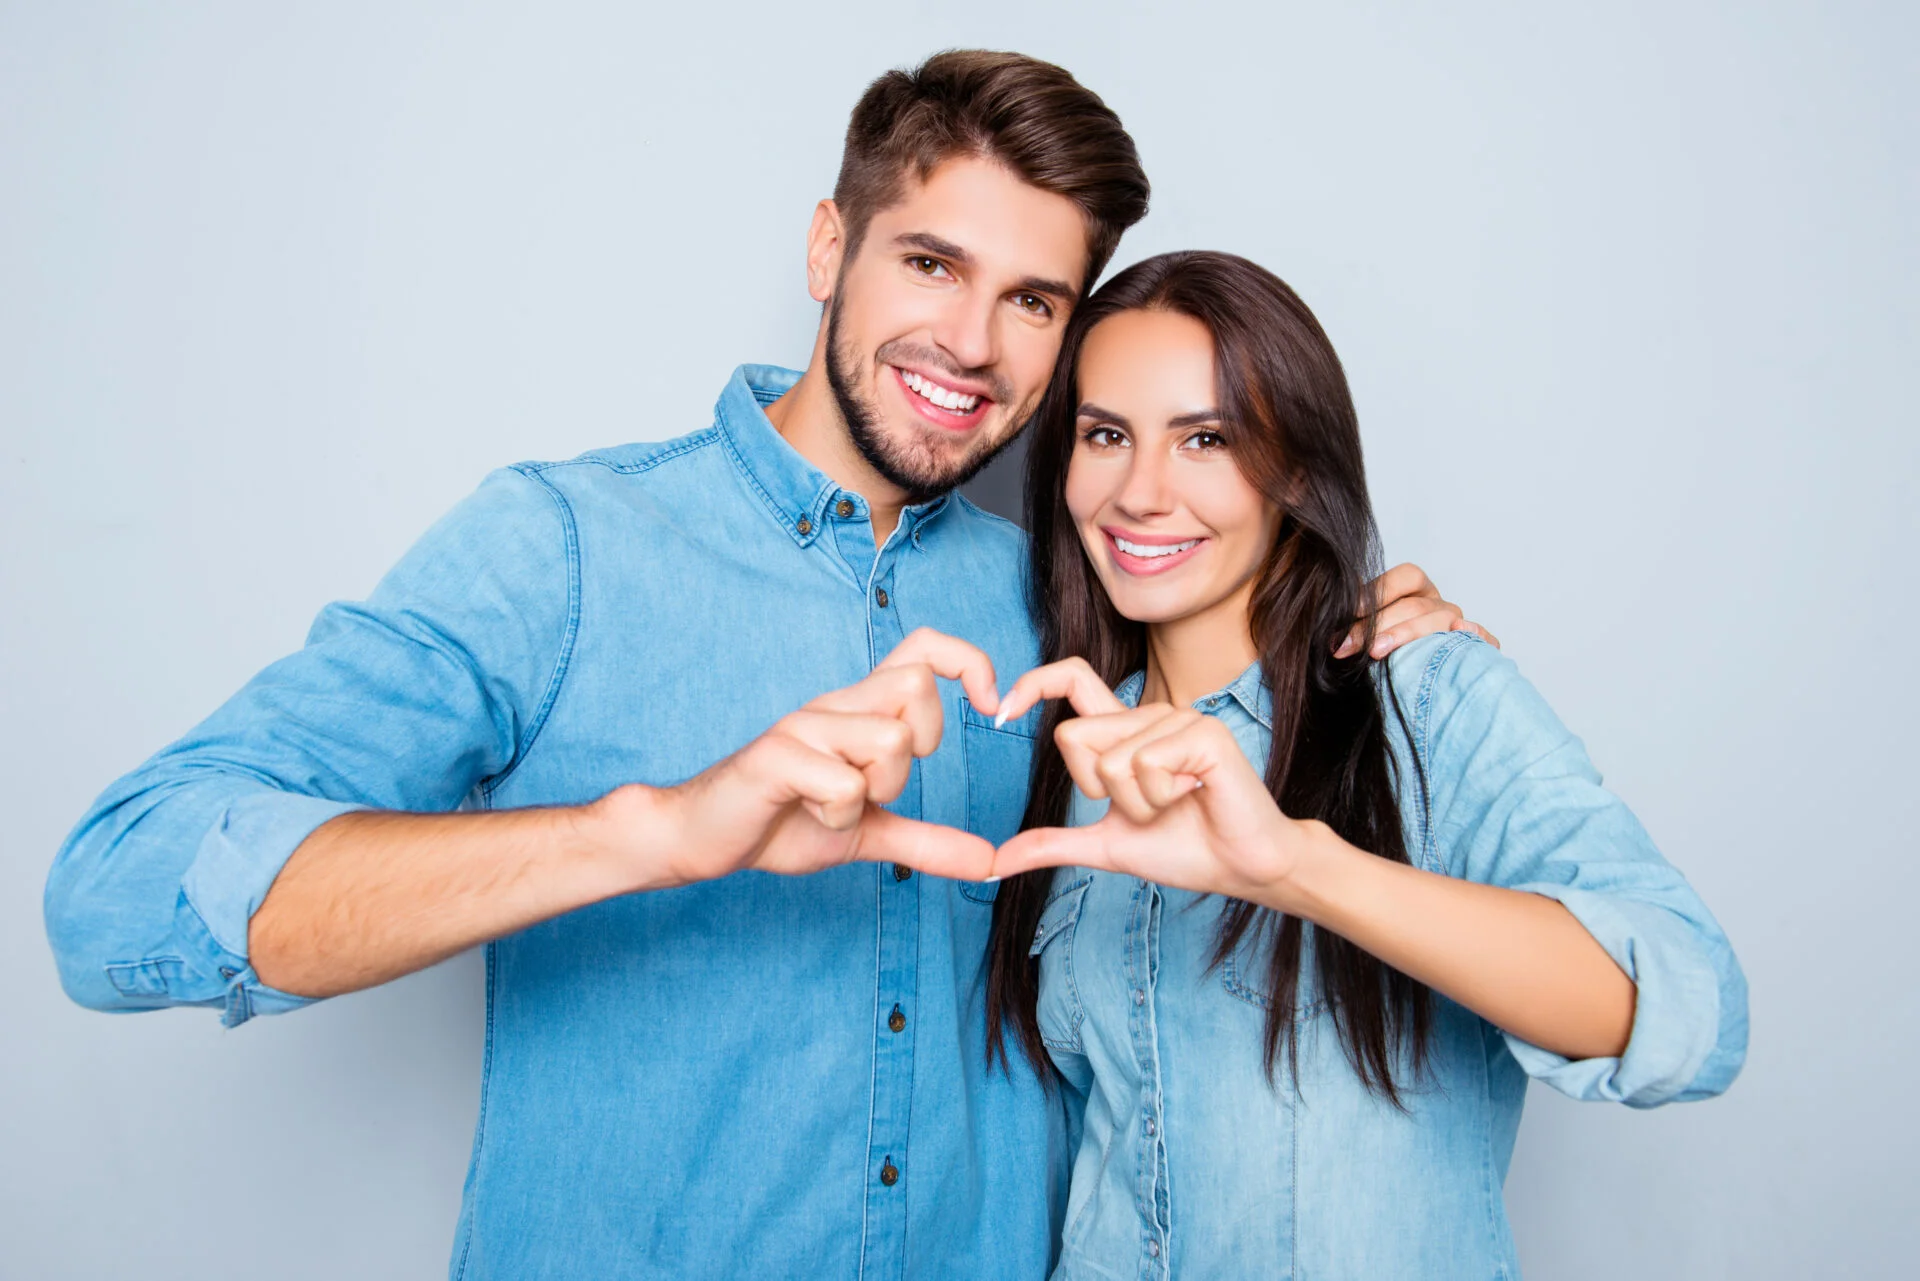 Cheerful smiling man and woman in love making heart with fingers